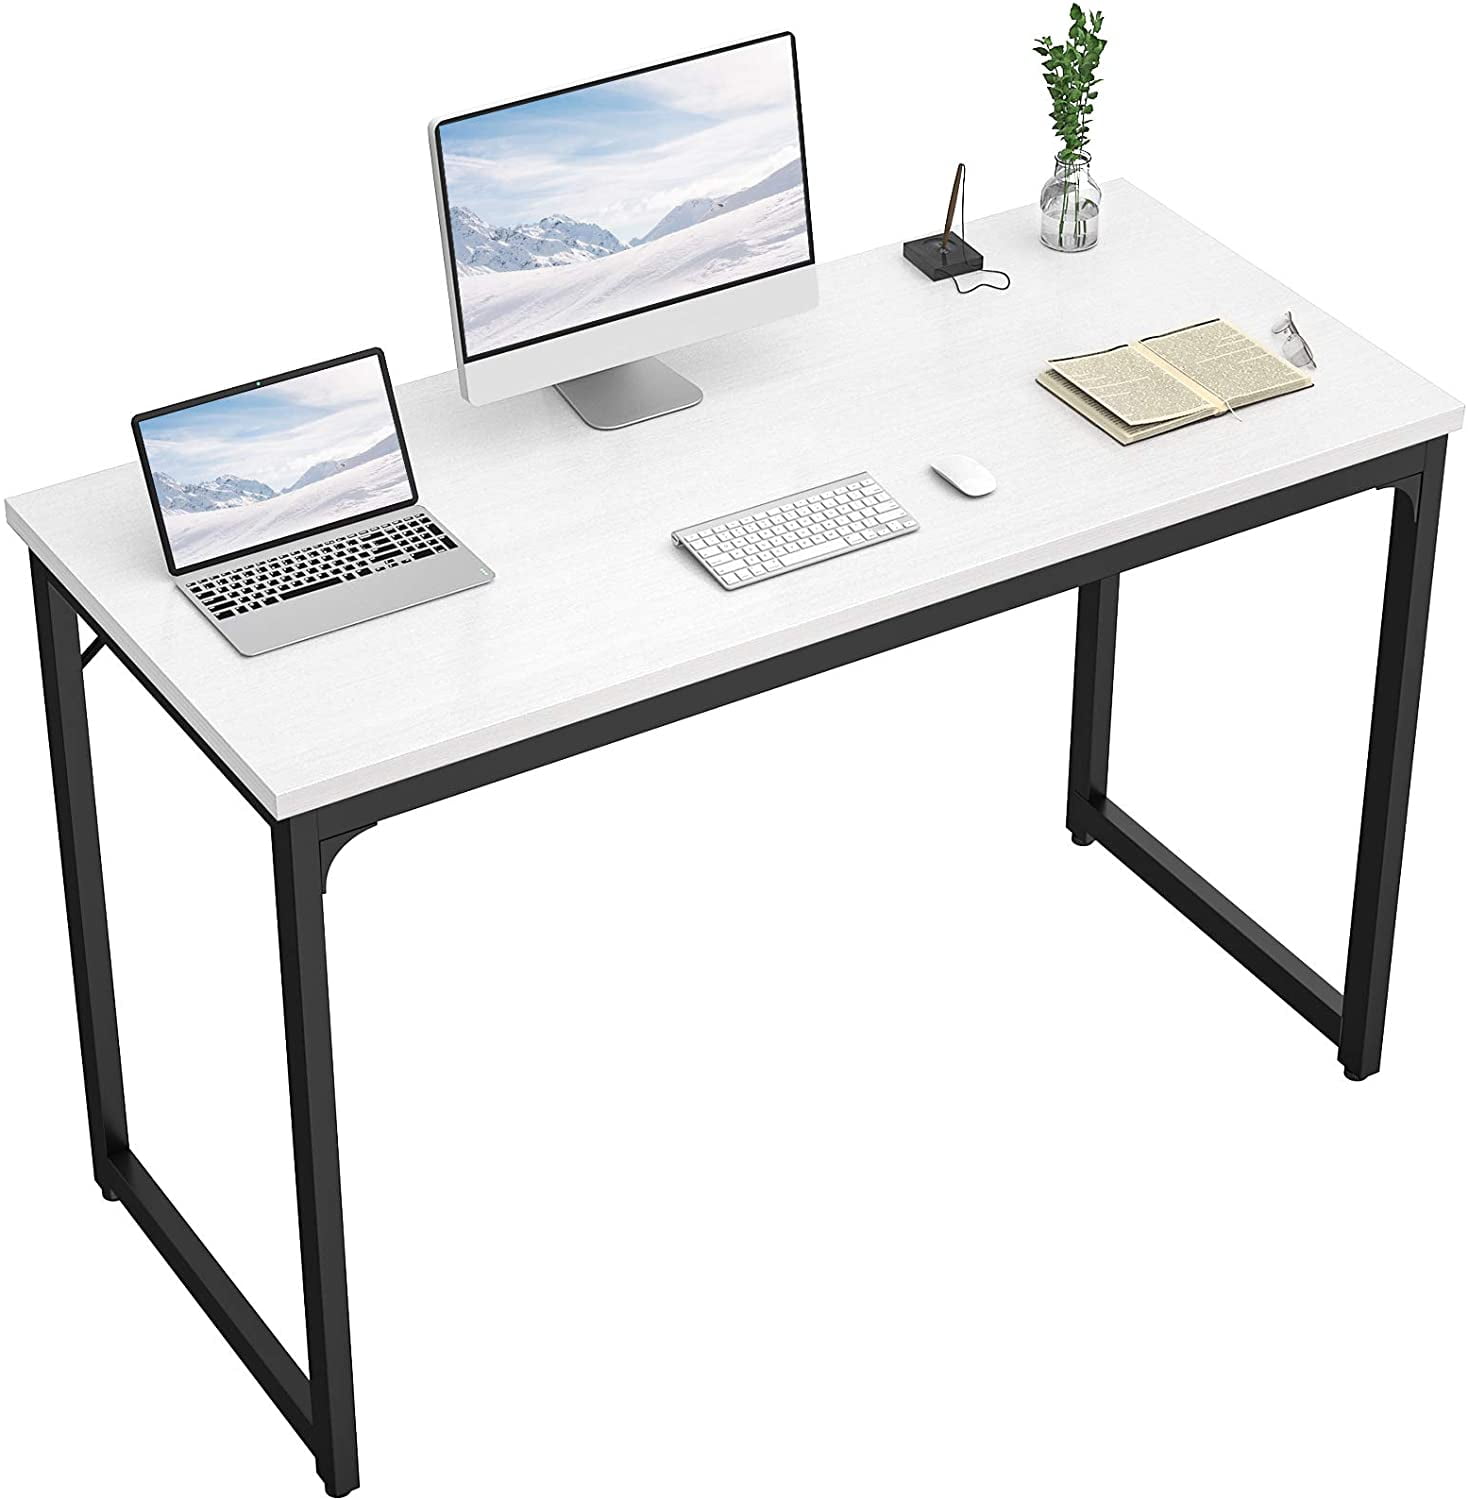 Foxemart Computer Desk 55” Modern Sturdy Office Desk PC Laptop Notebook Study Writing Table for Home Office Workstations Black 